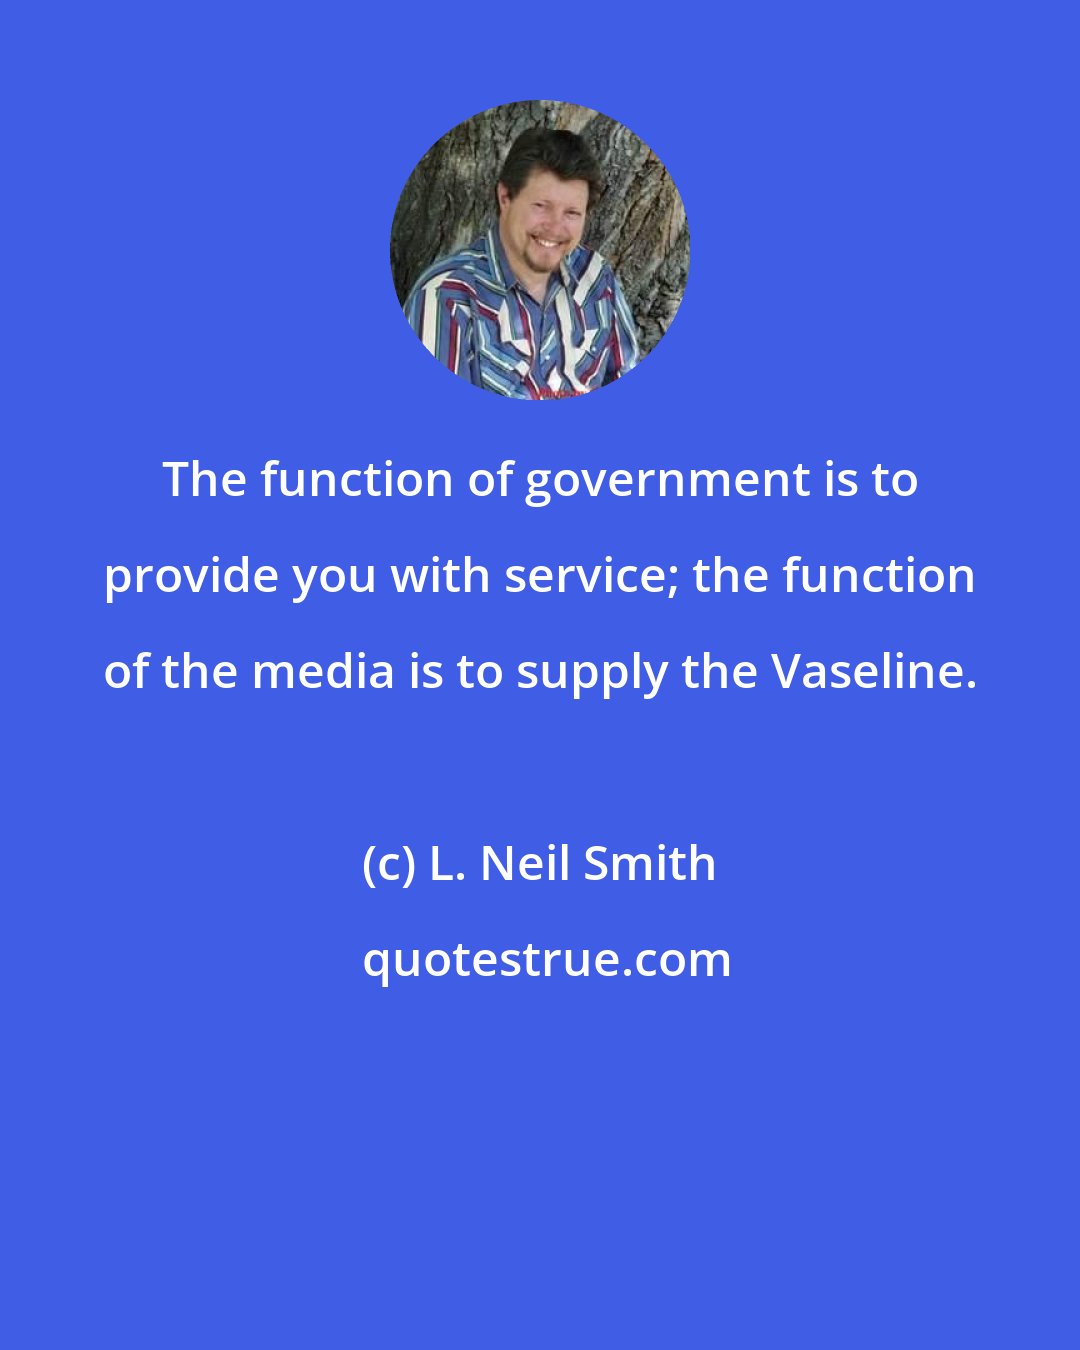 L. Neil Smith: The function of government is to provide you with service; the function of the media is to supply the Vaseline.